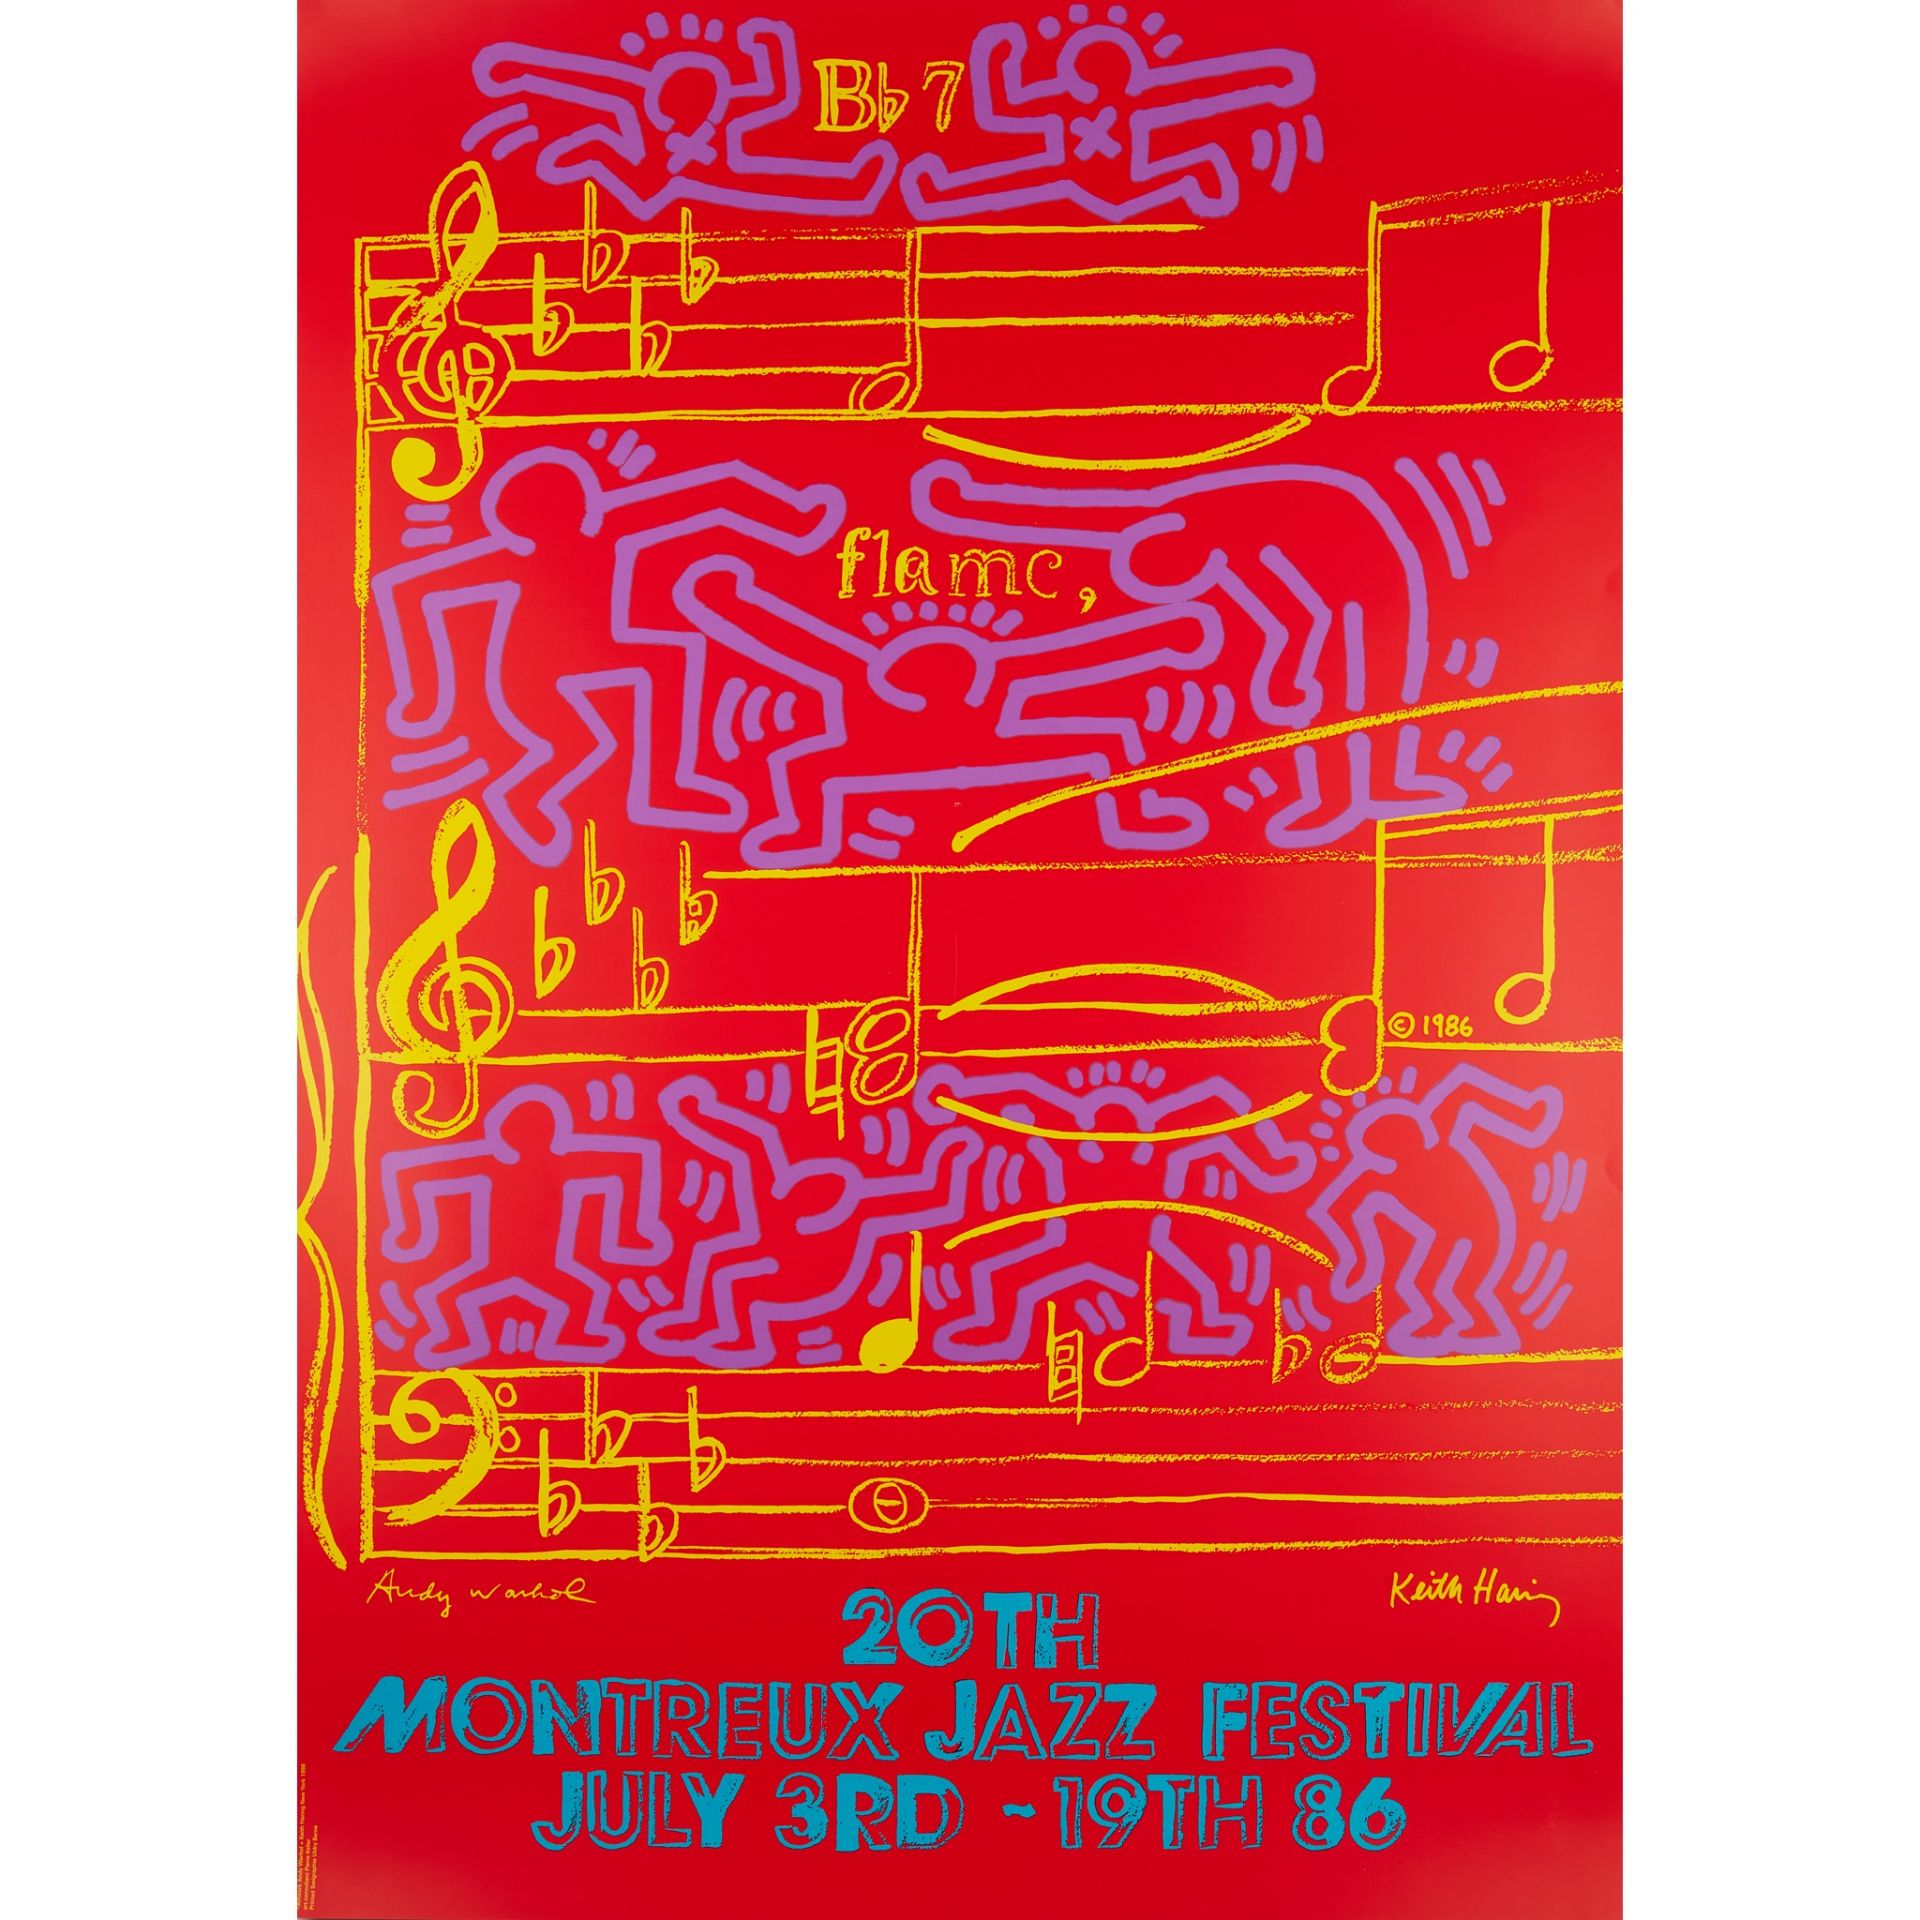 ANDY WARHOL (AMERICAN 1928-1987) AND KEITH HARING (AMERICAN 1958-1990) MONTREUX JAZZ FESTIVAL -